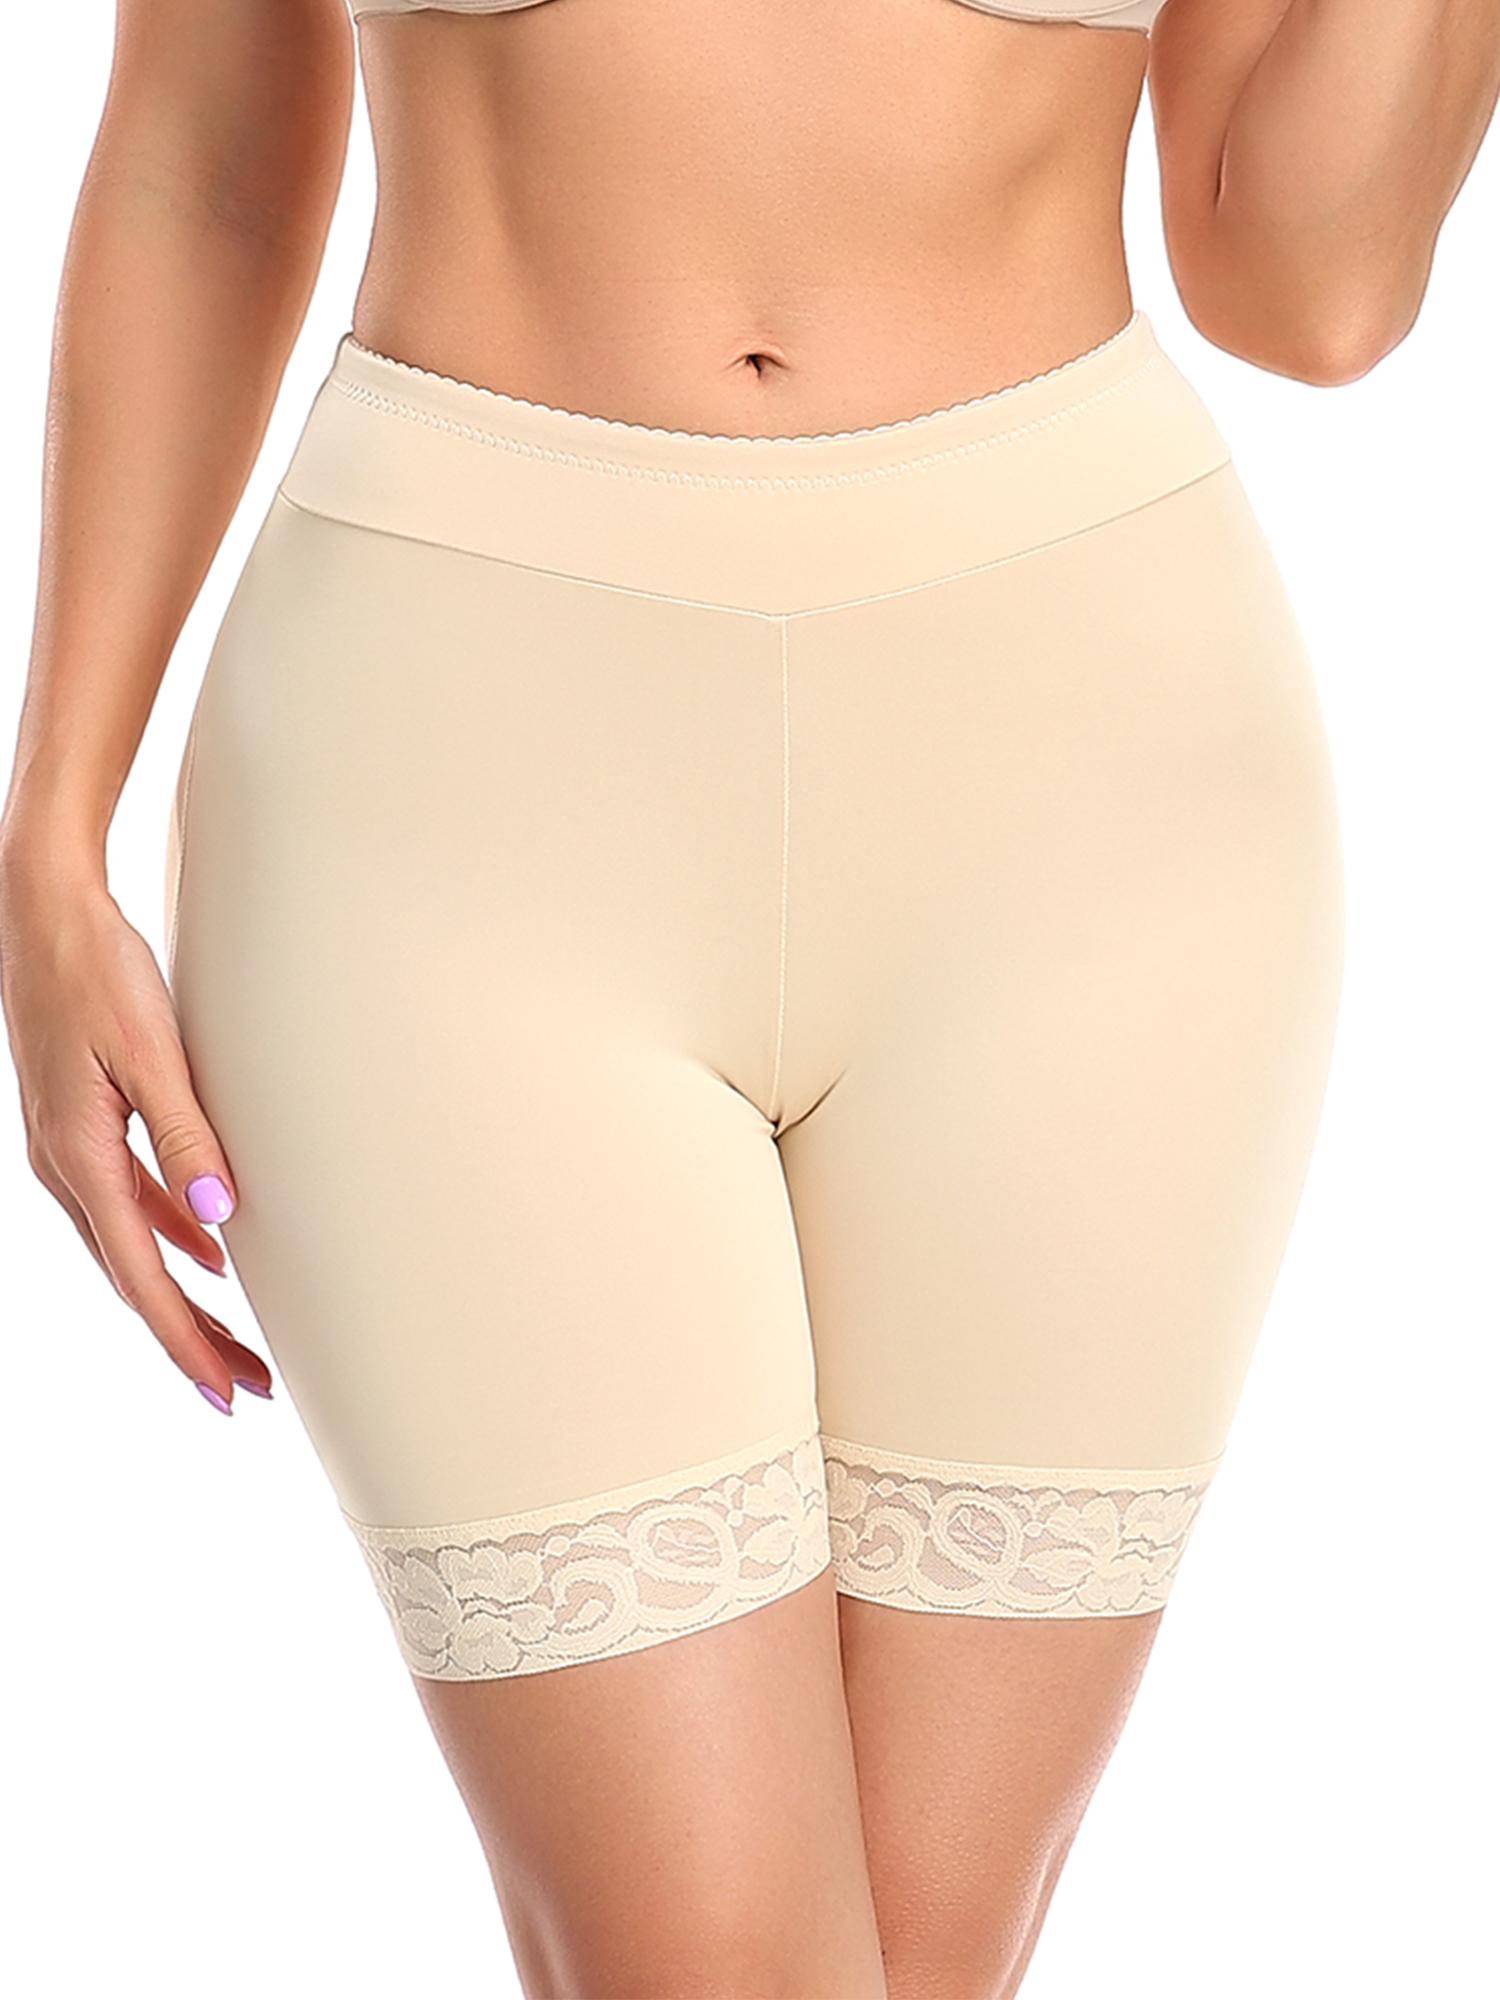 Foreign Women Body Shaper Padded Butt Lifter Shorts in Central Business  District - Clothing Accessories, Lamide Yemi